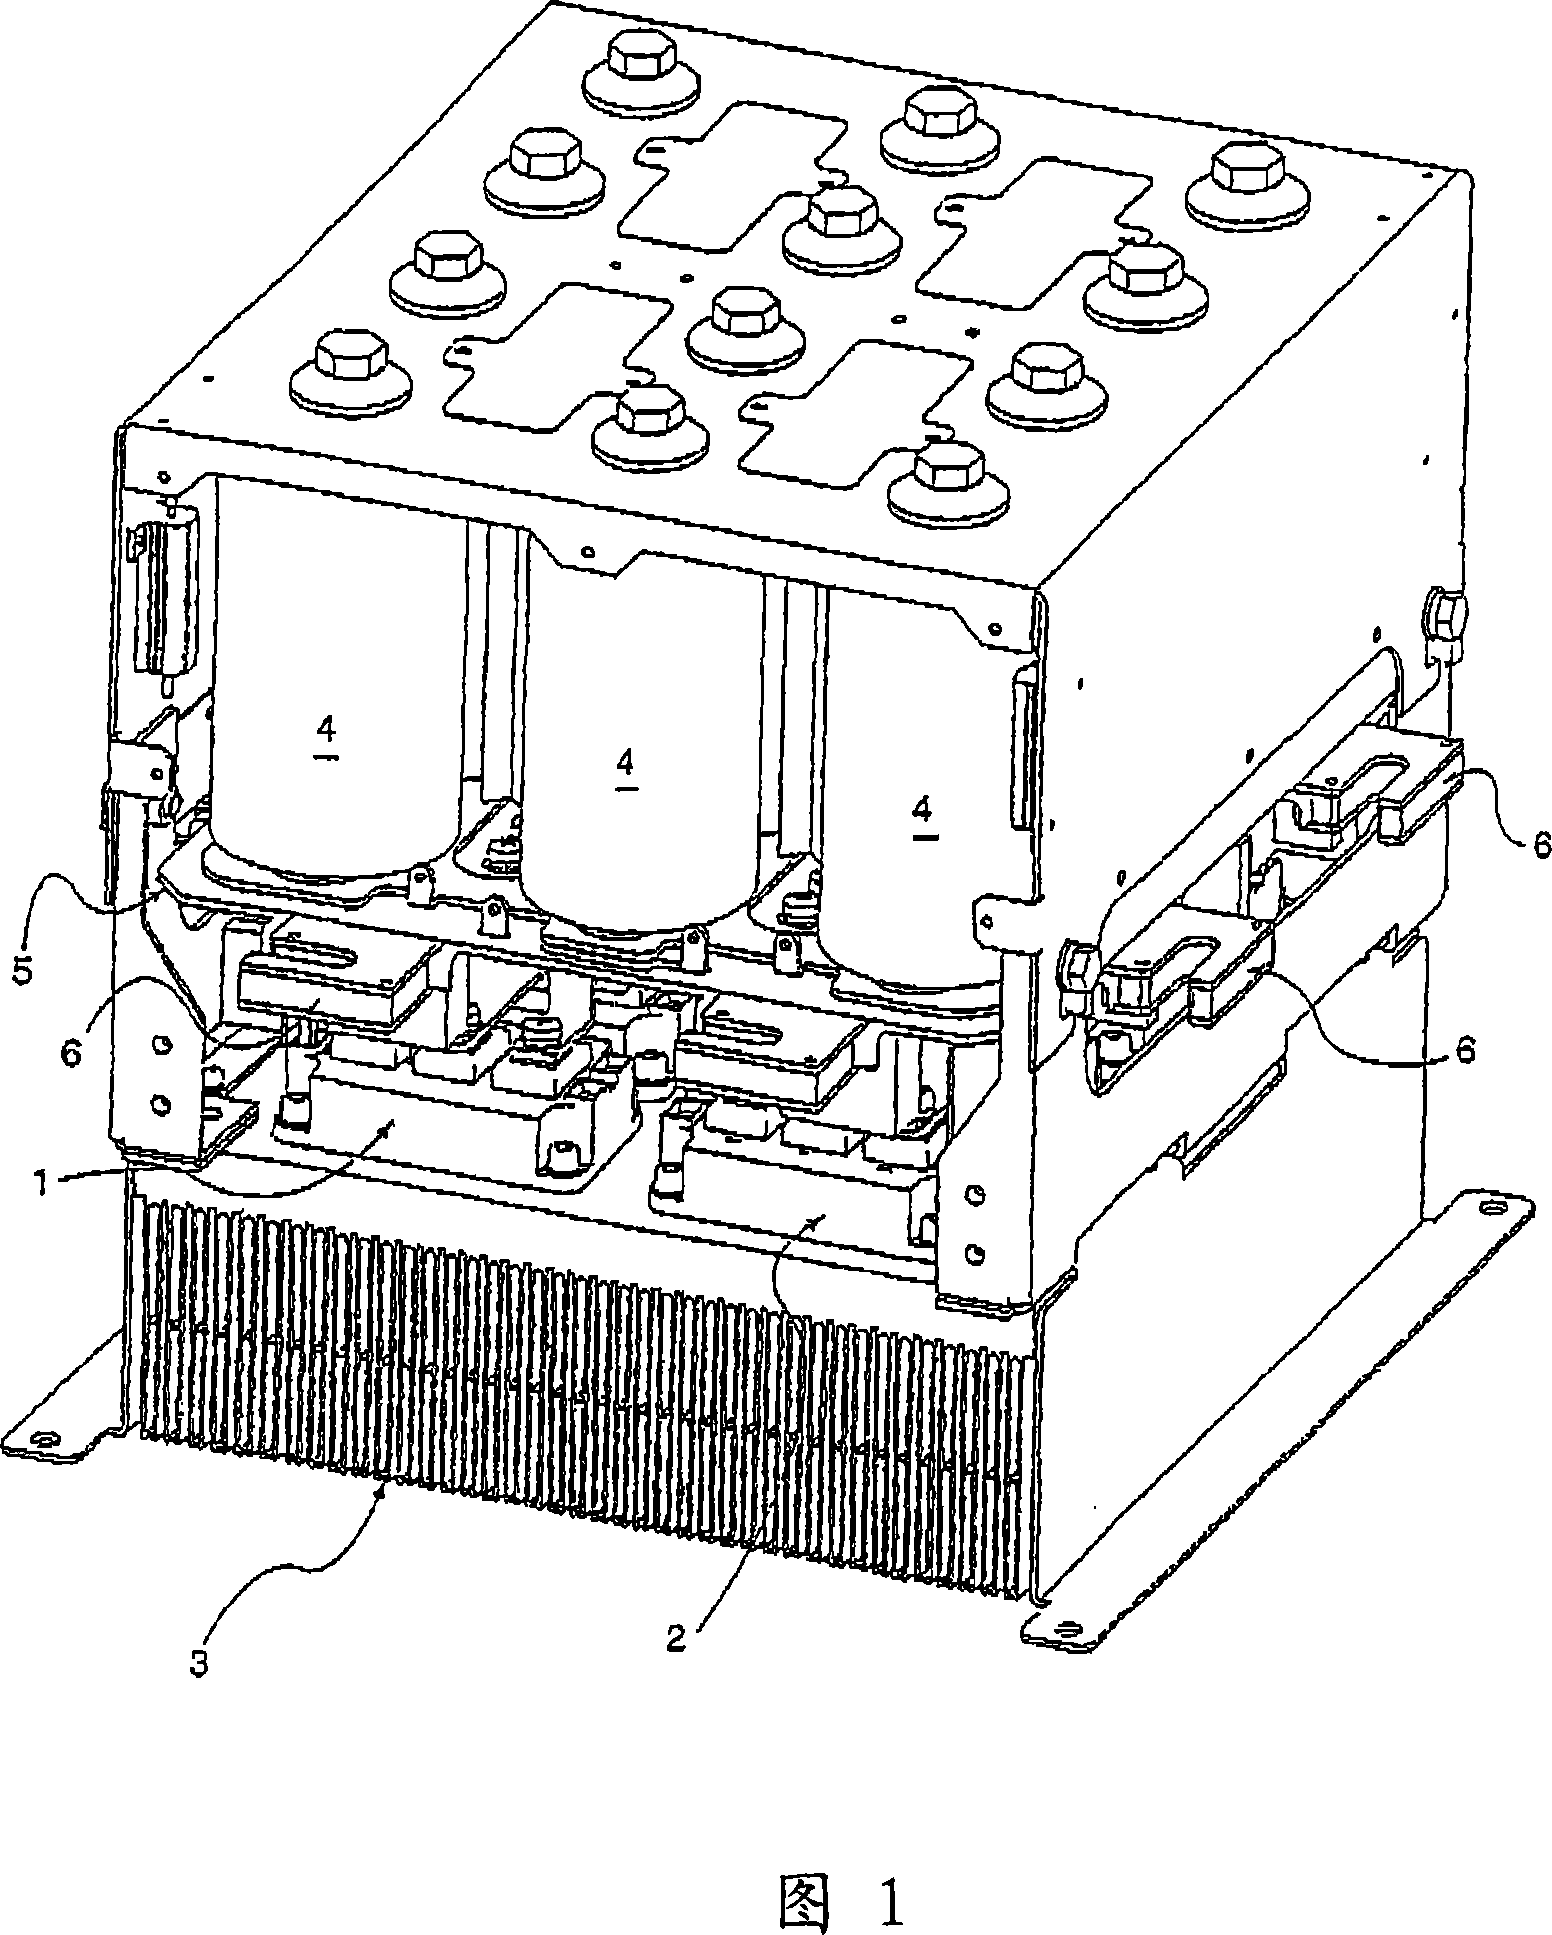 Connection system between capacitor batteries